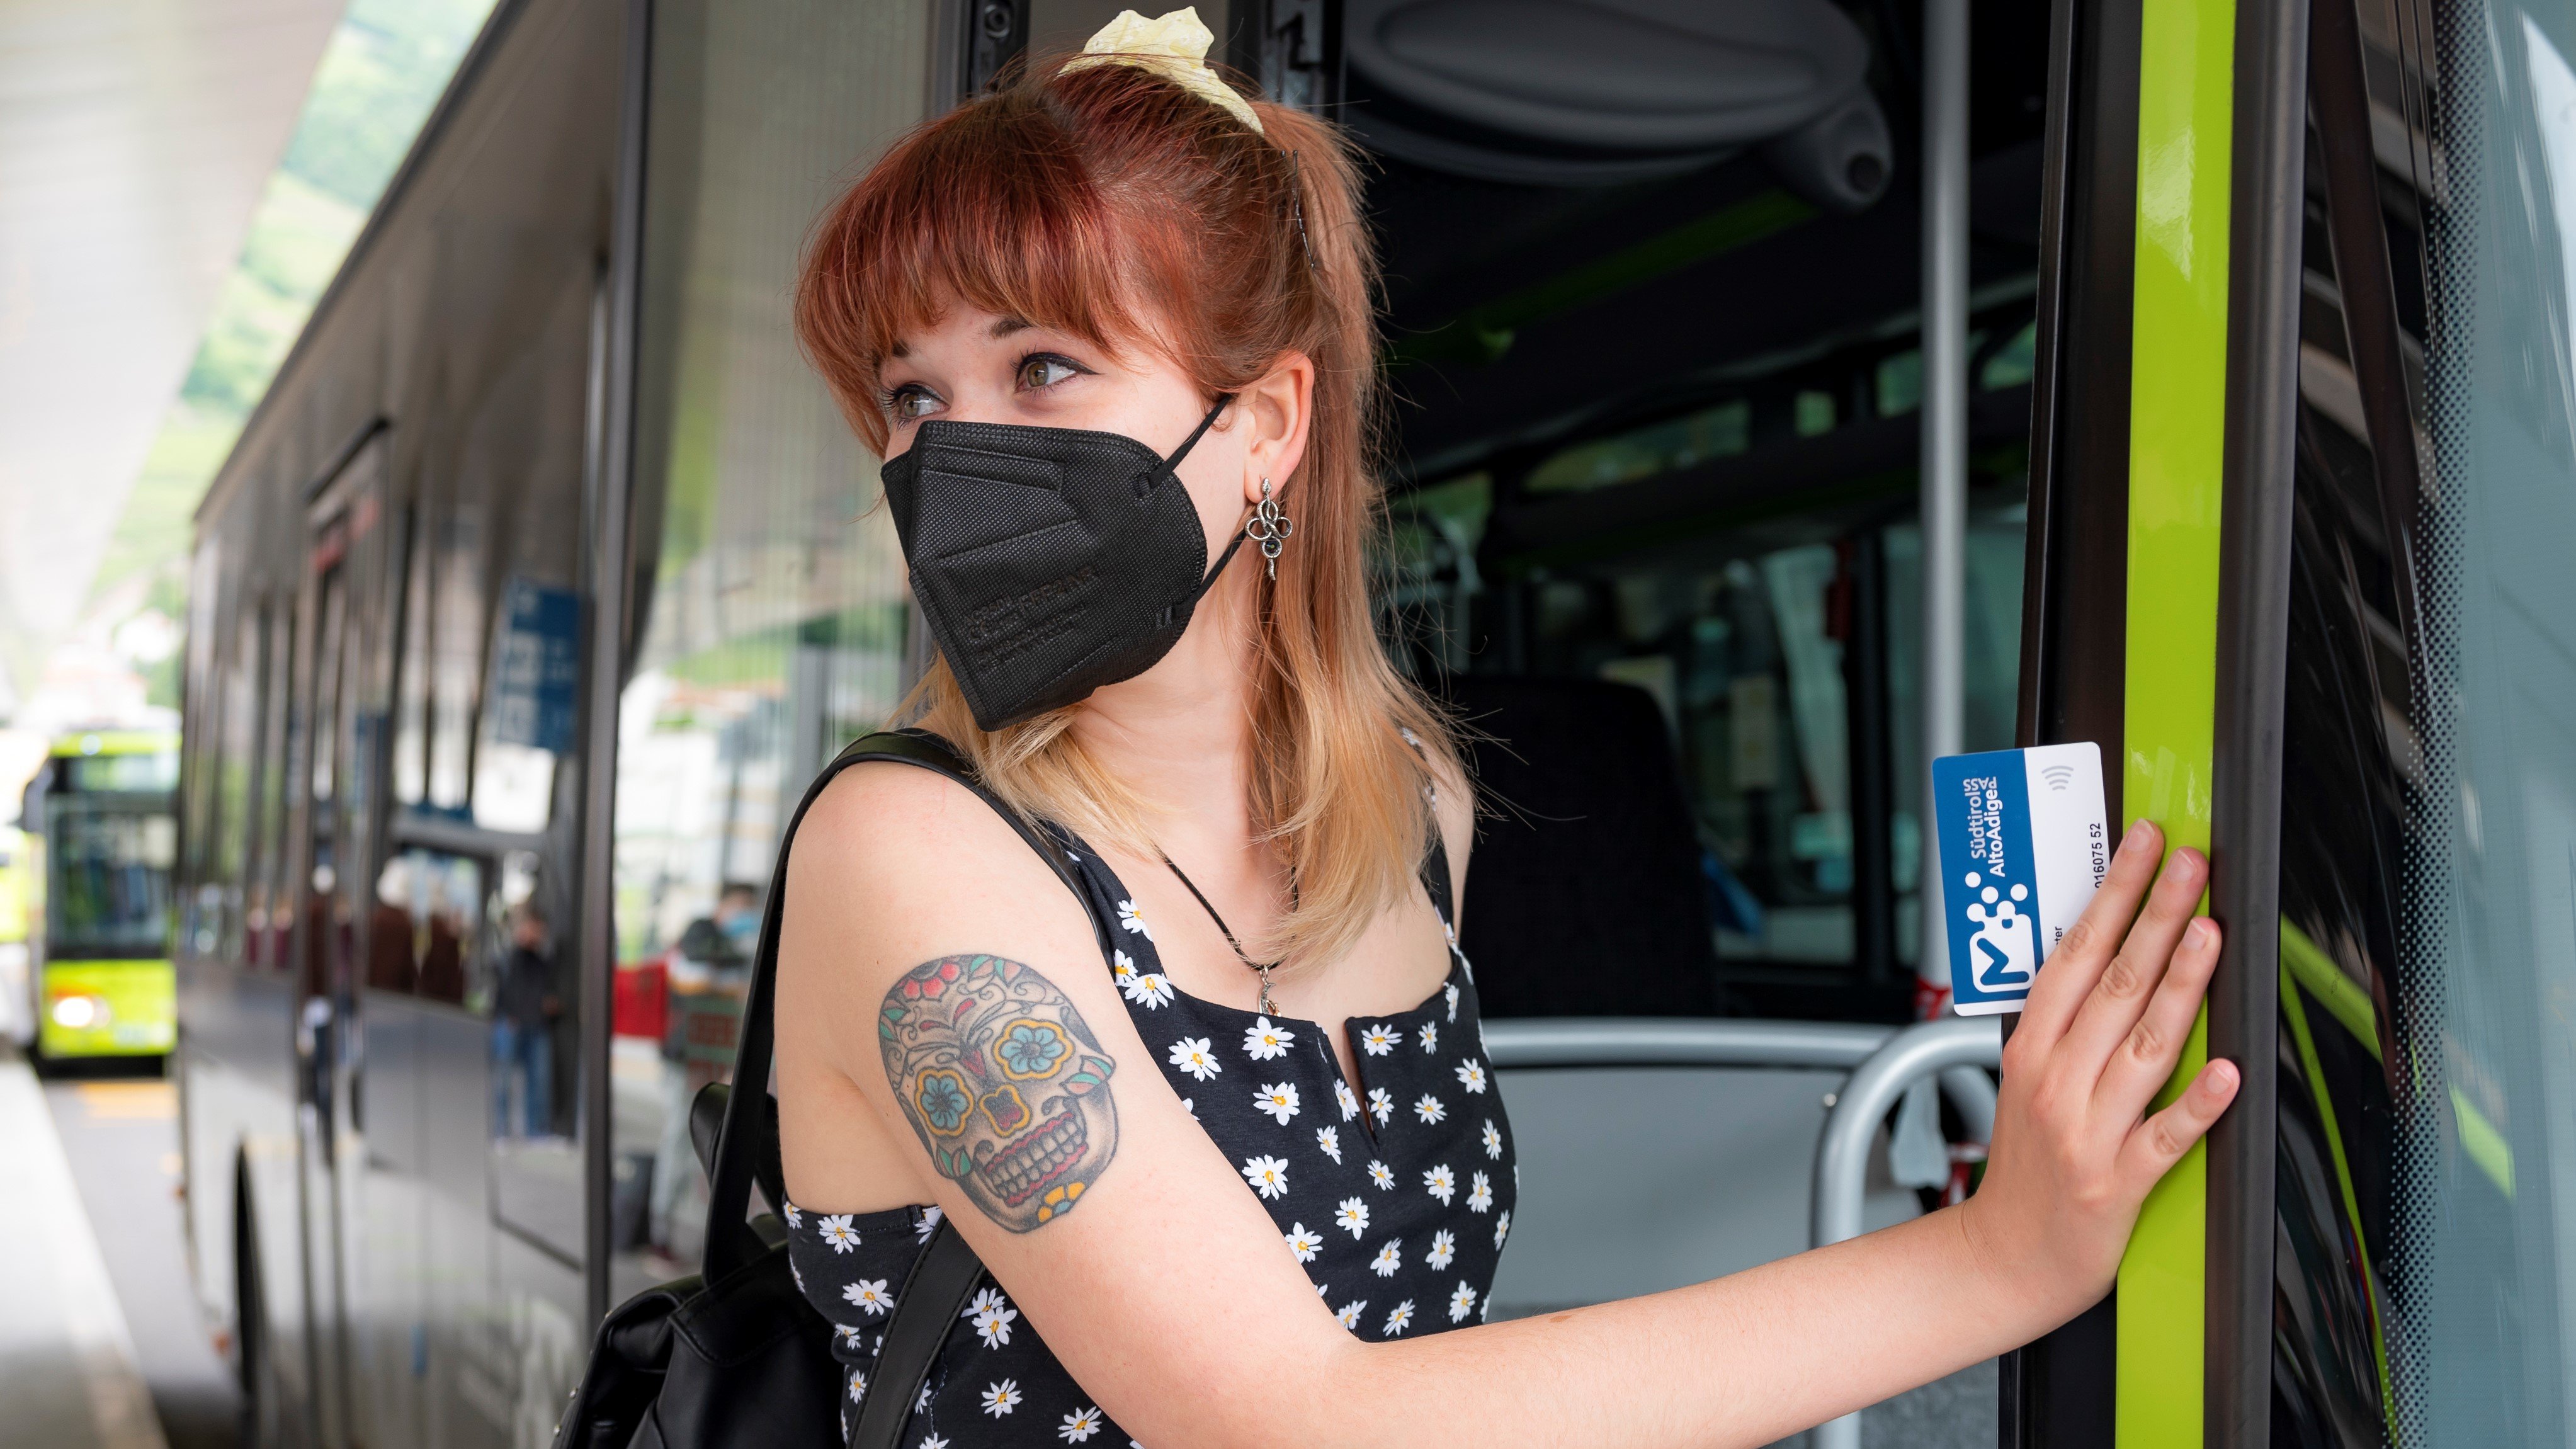 A girl wearing an FFP2 mask gets on the bus